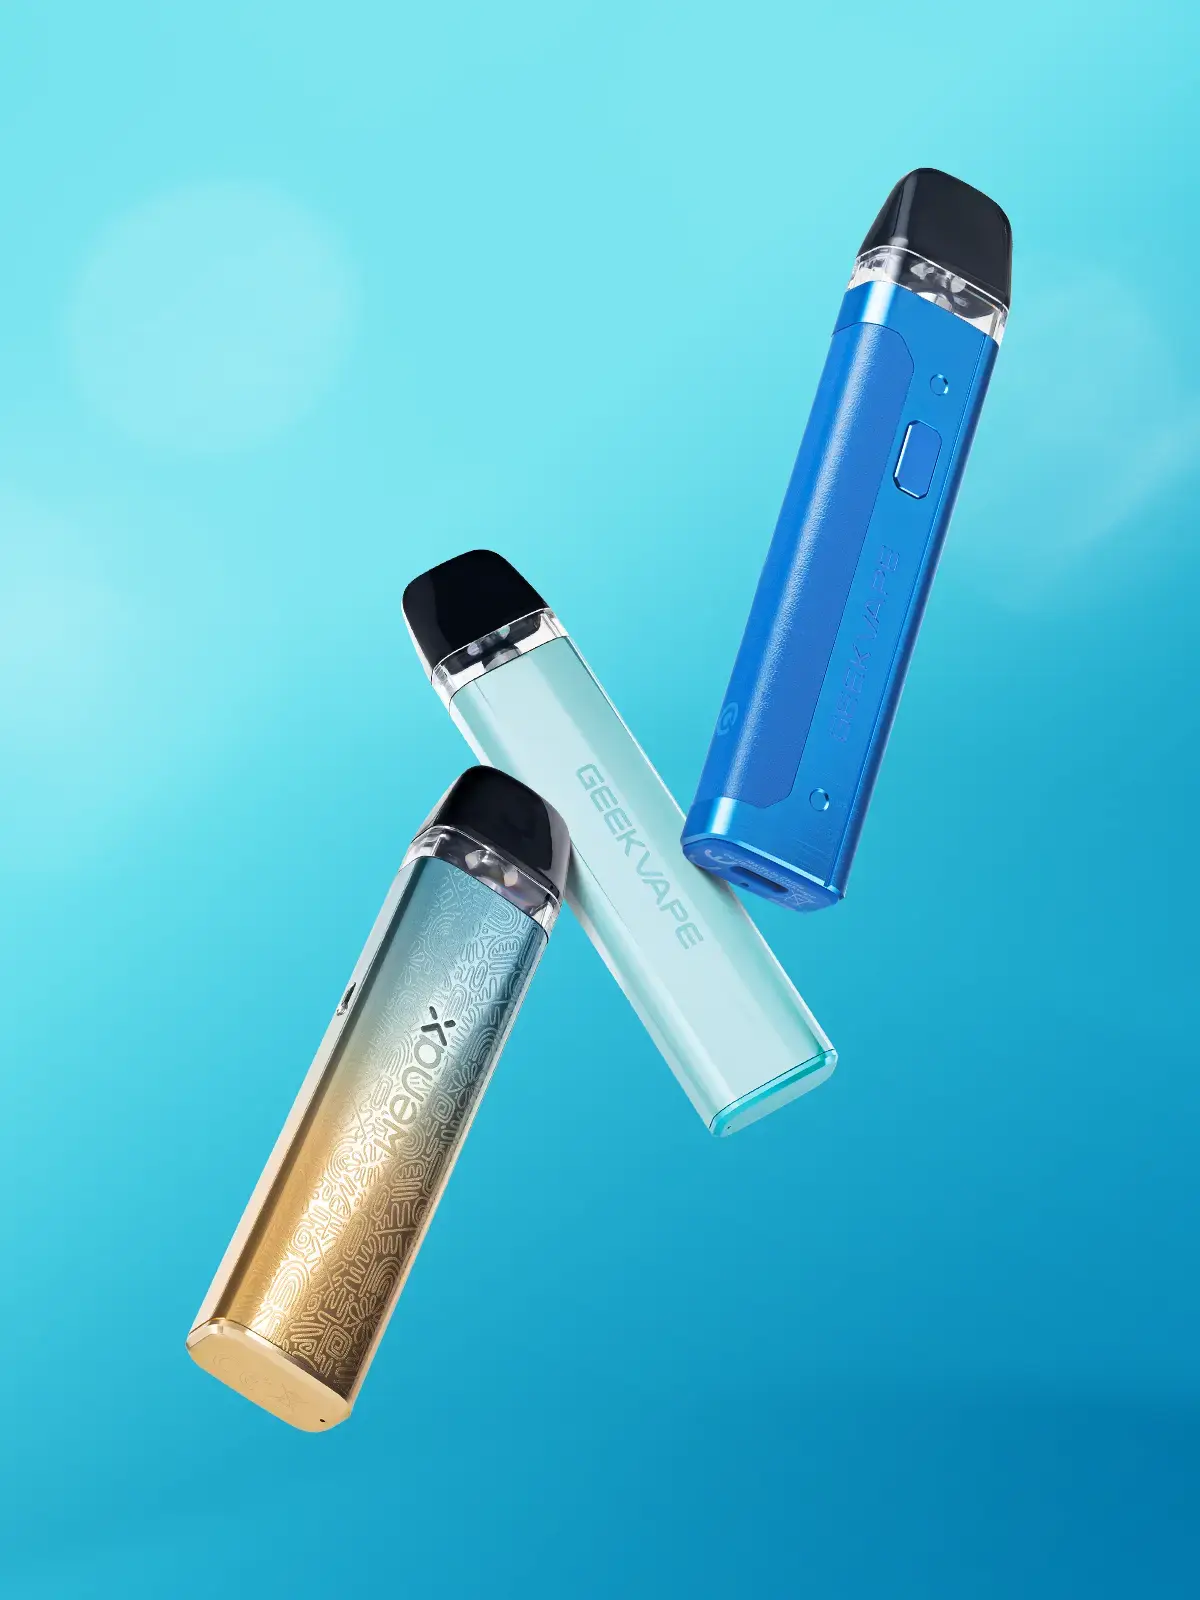 Three Geekvape devices; Wenax Q Mini, Sonder Q and Aegis Q floating in front of a blue background